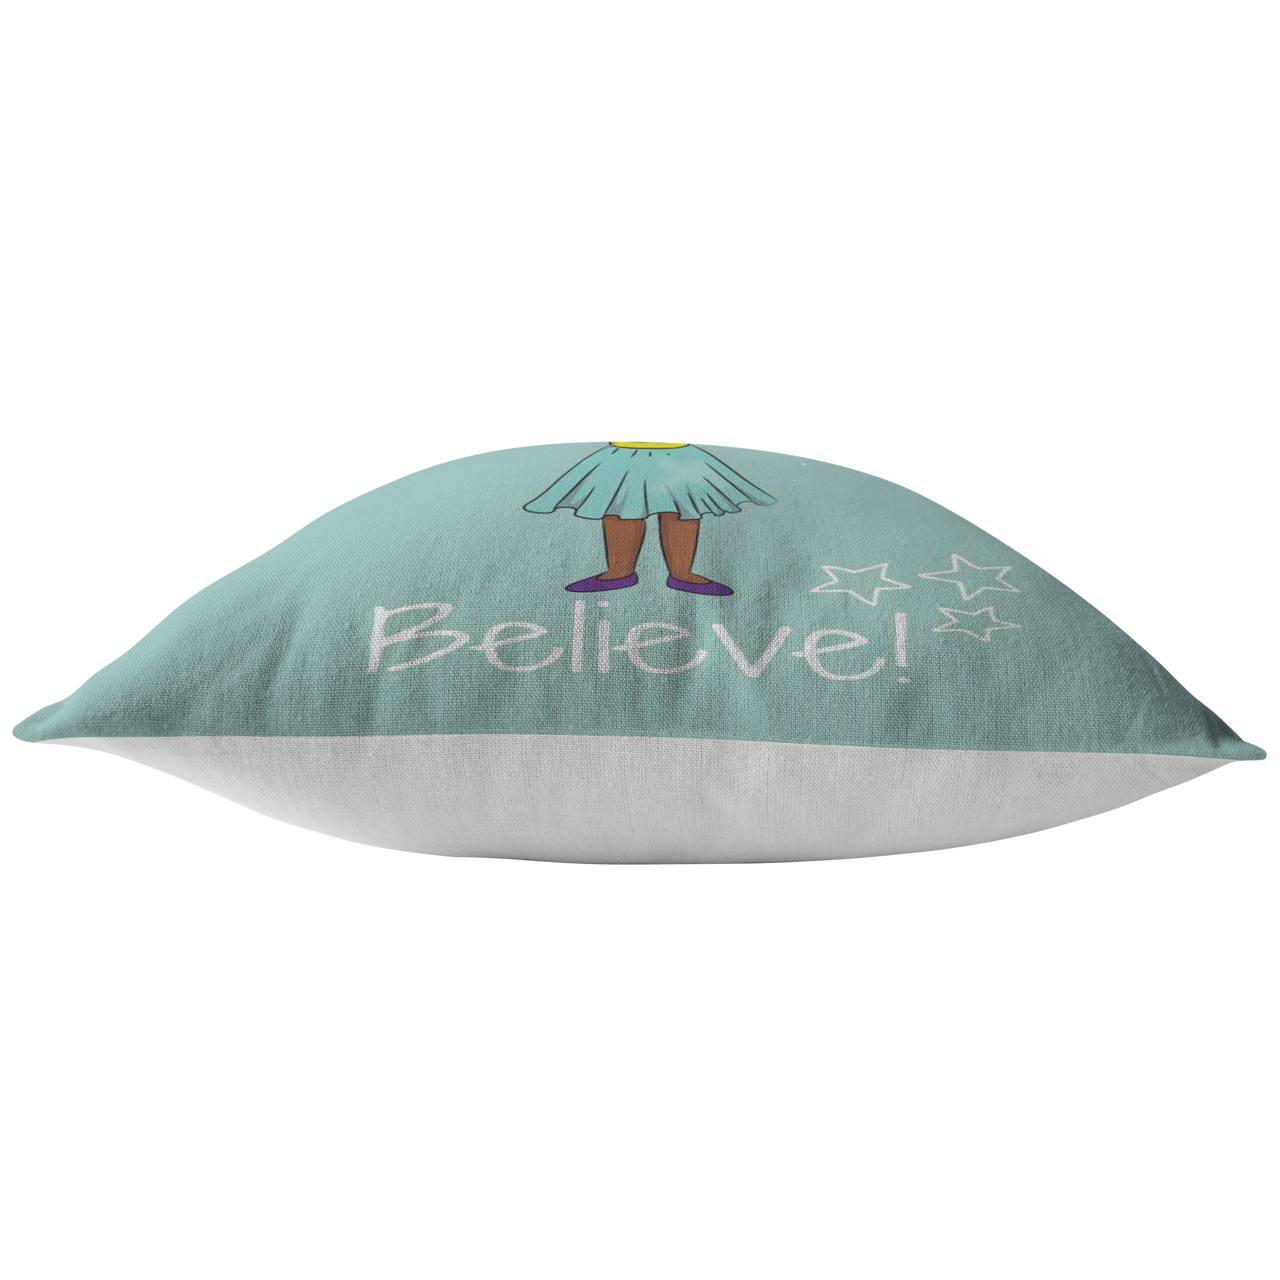 The I Believe Singer Throw Pillow